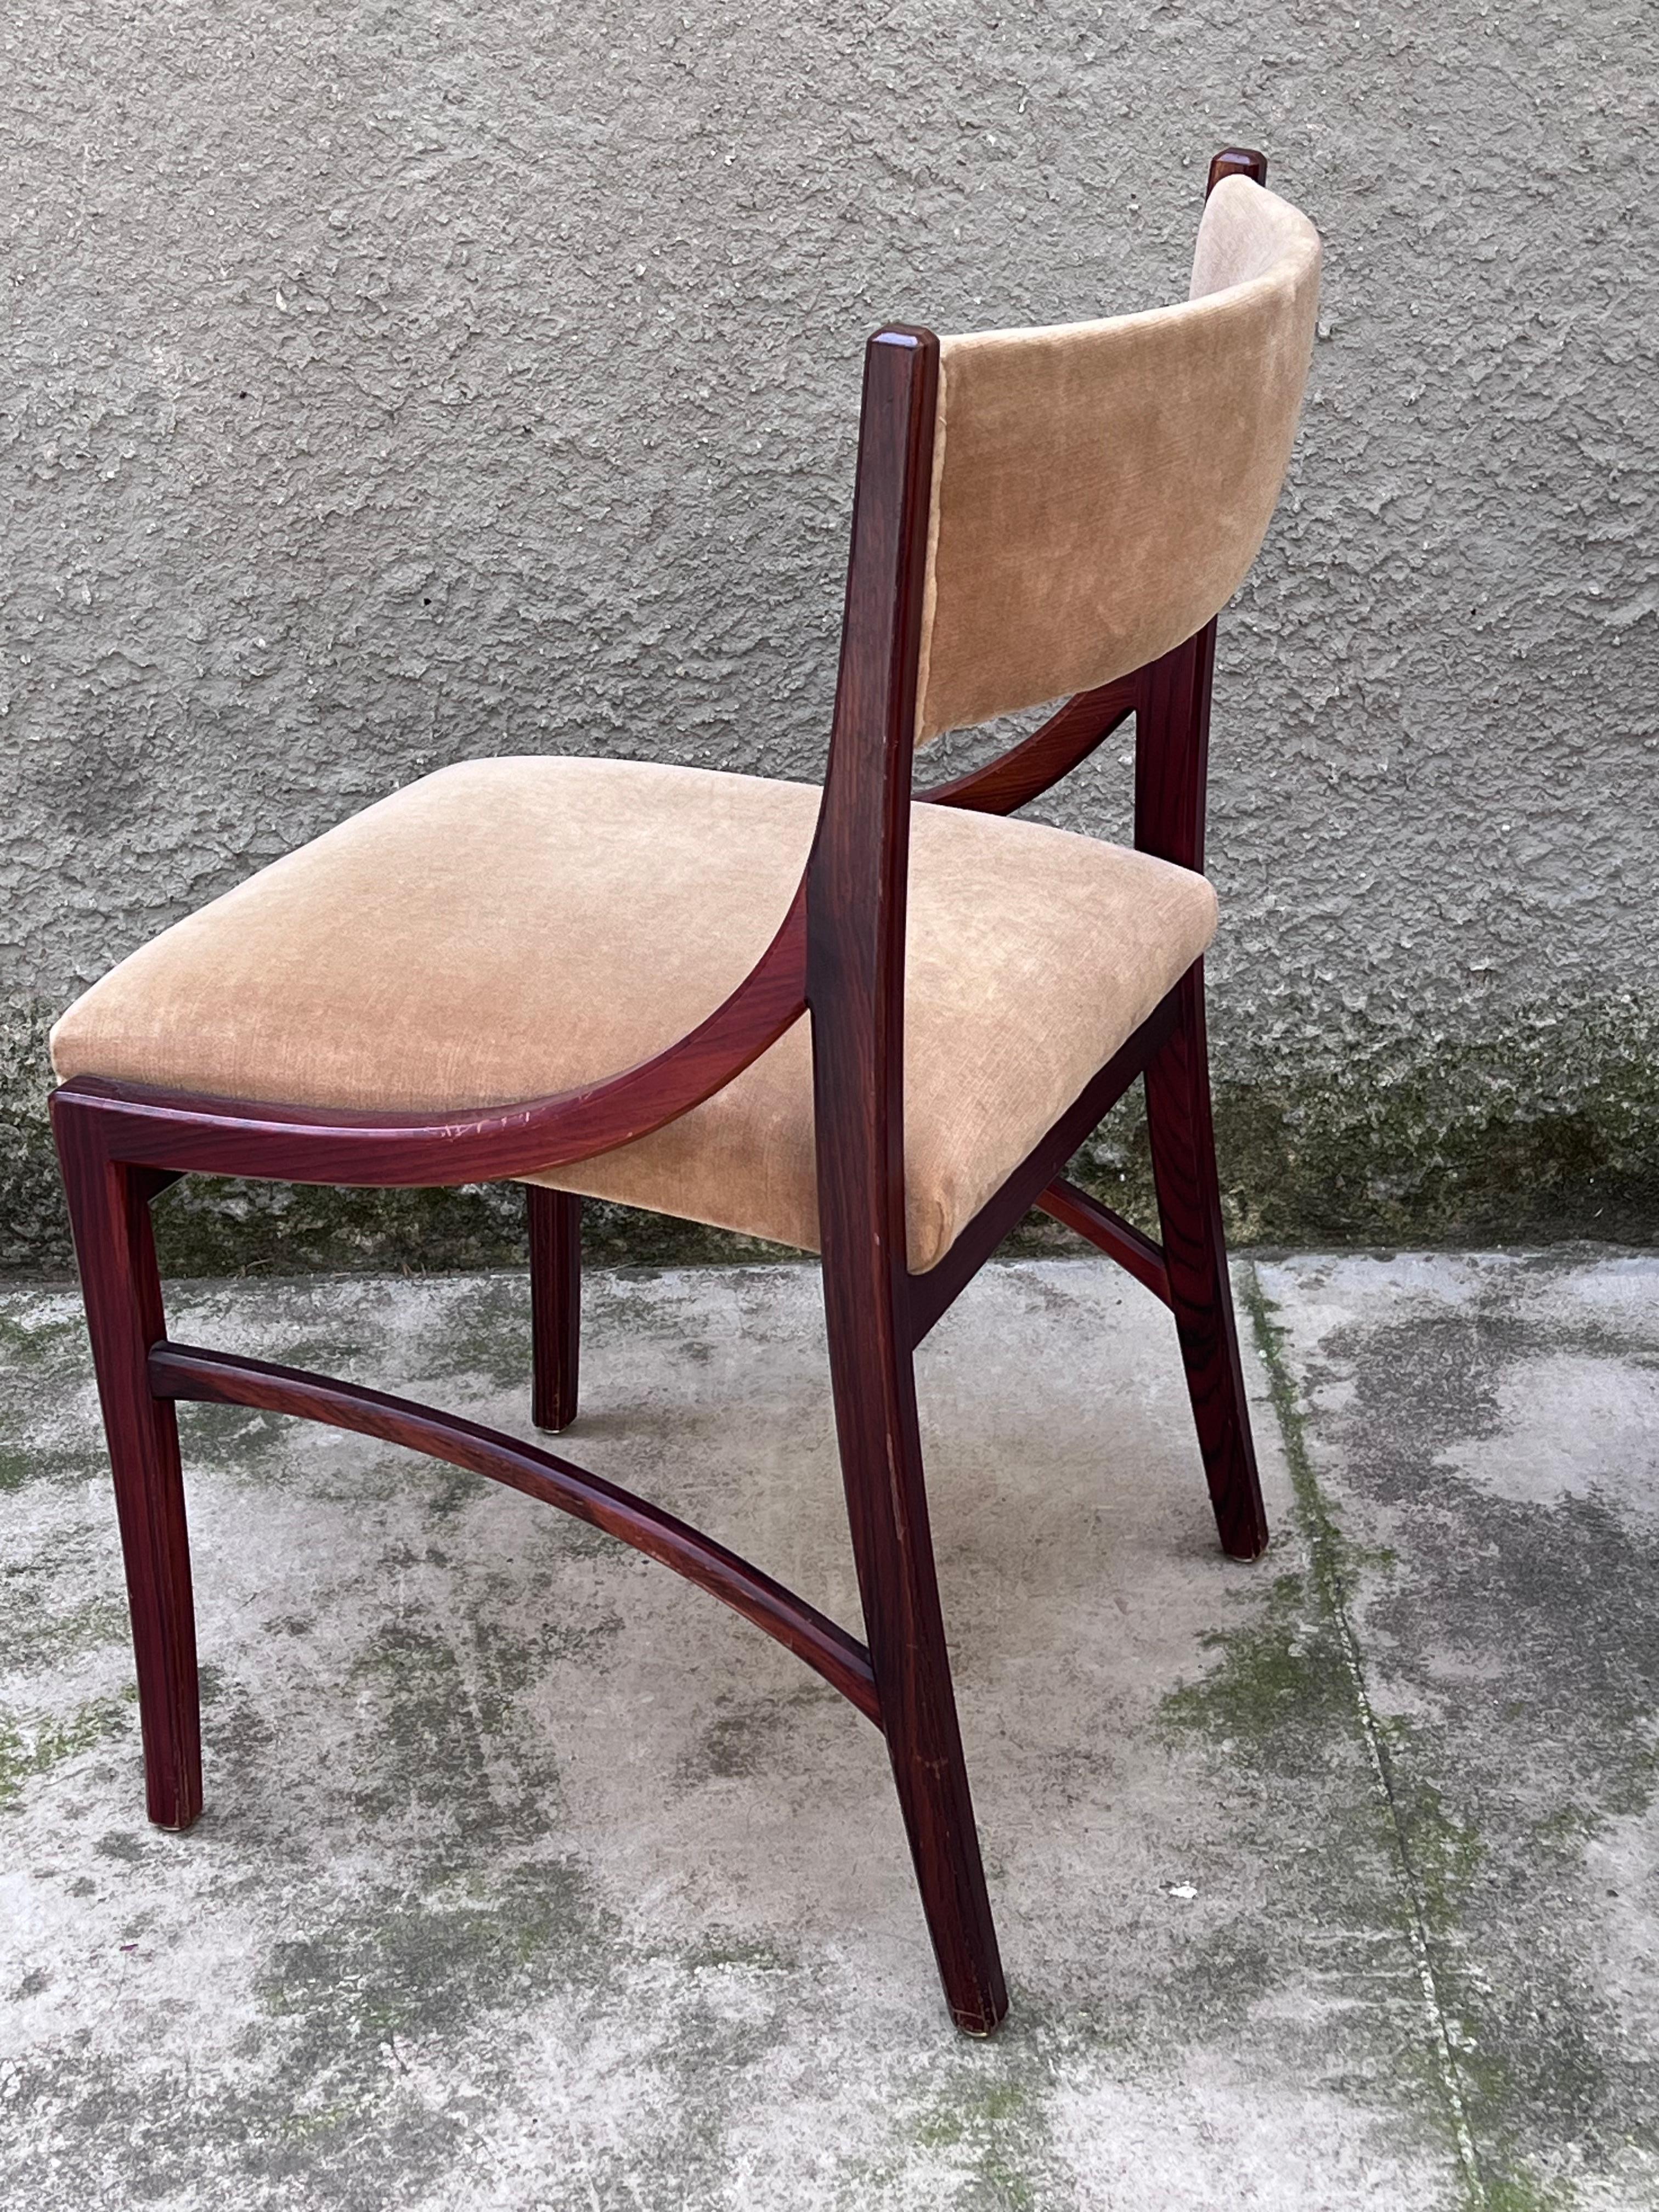 20th Century Set of Six Mahogany Chairs Mod.110 by Ico Parisi for Cassina - Italy - 1960s For Sale